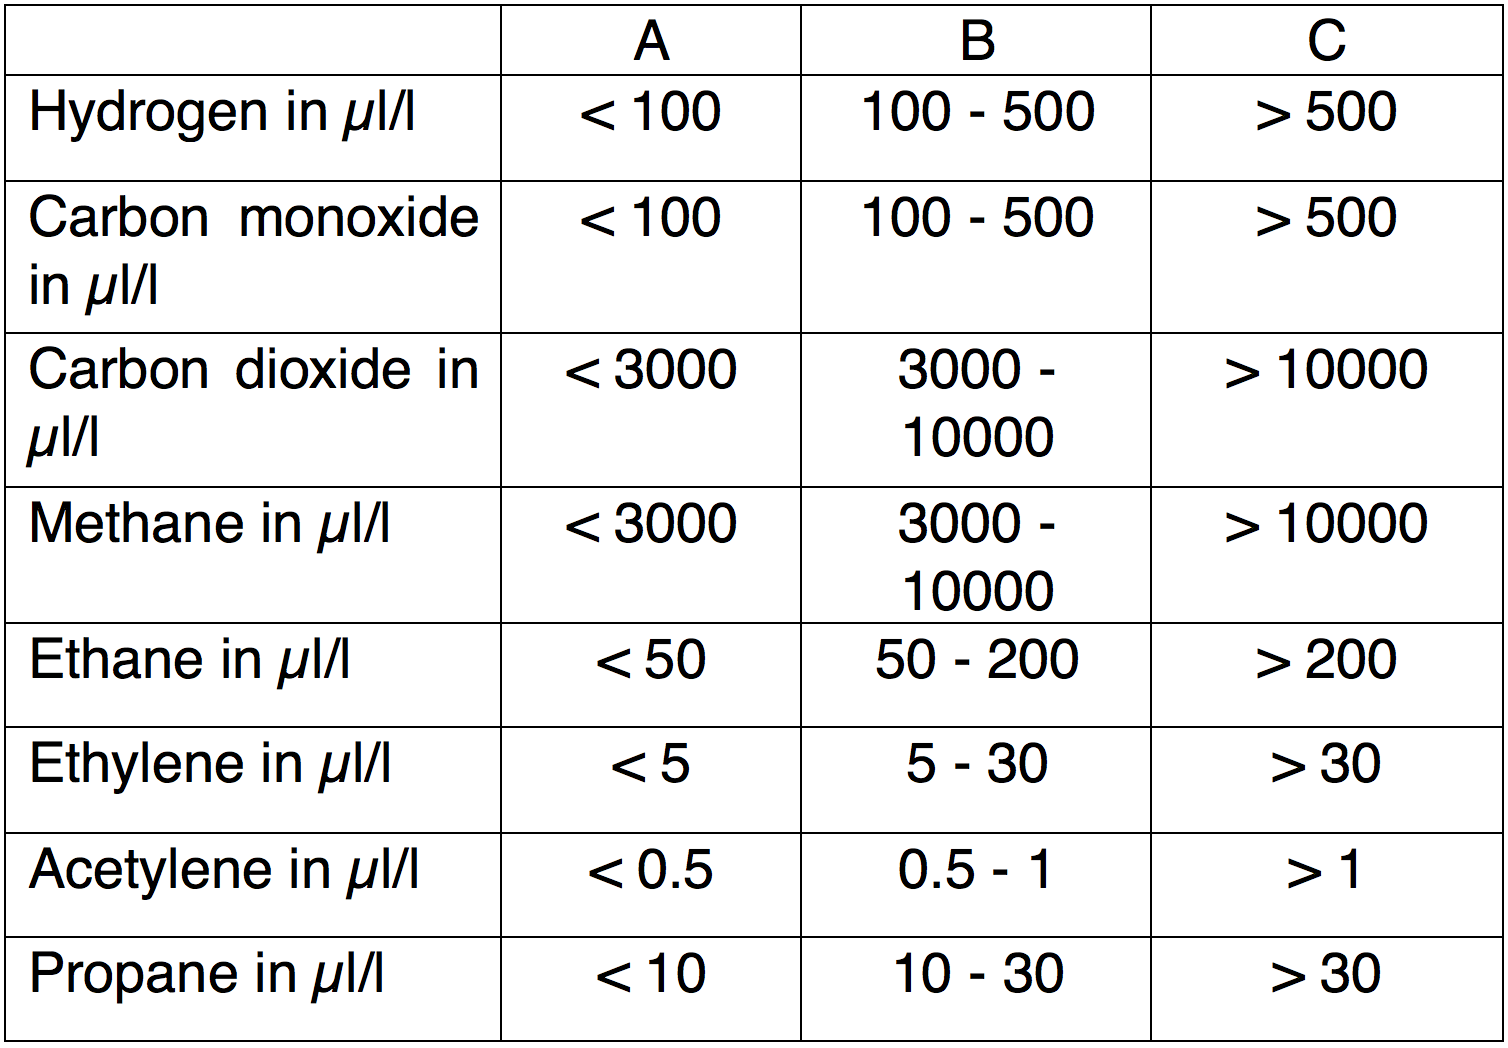 Table 1: Example of Limits of Dissolved Gases as Defined by Manufacturer